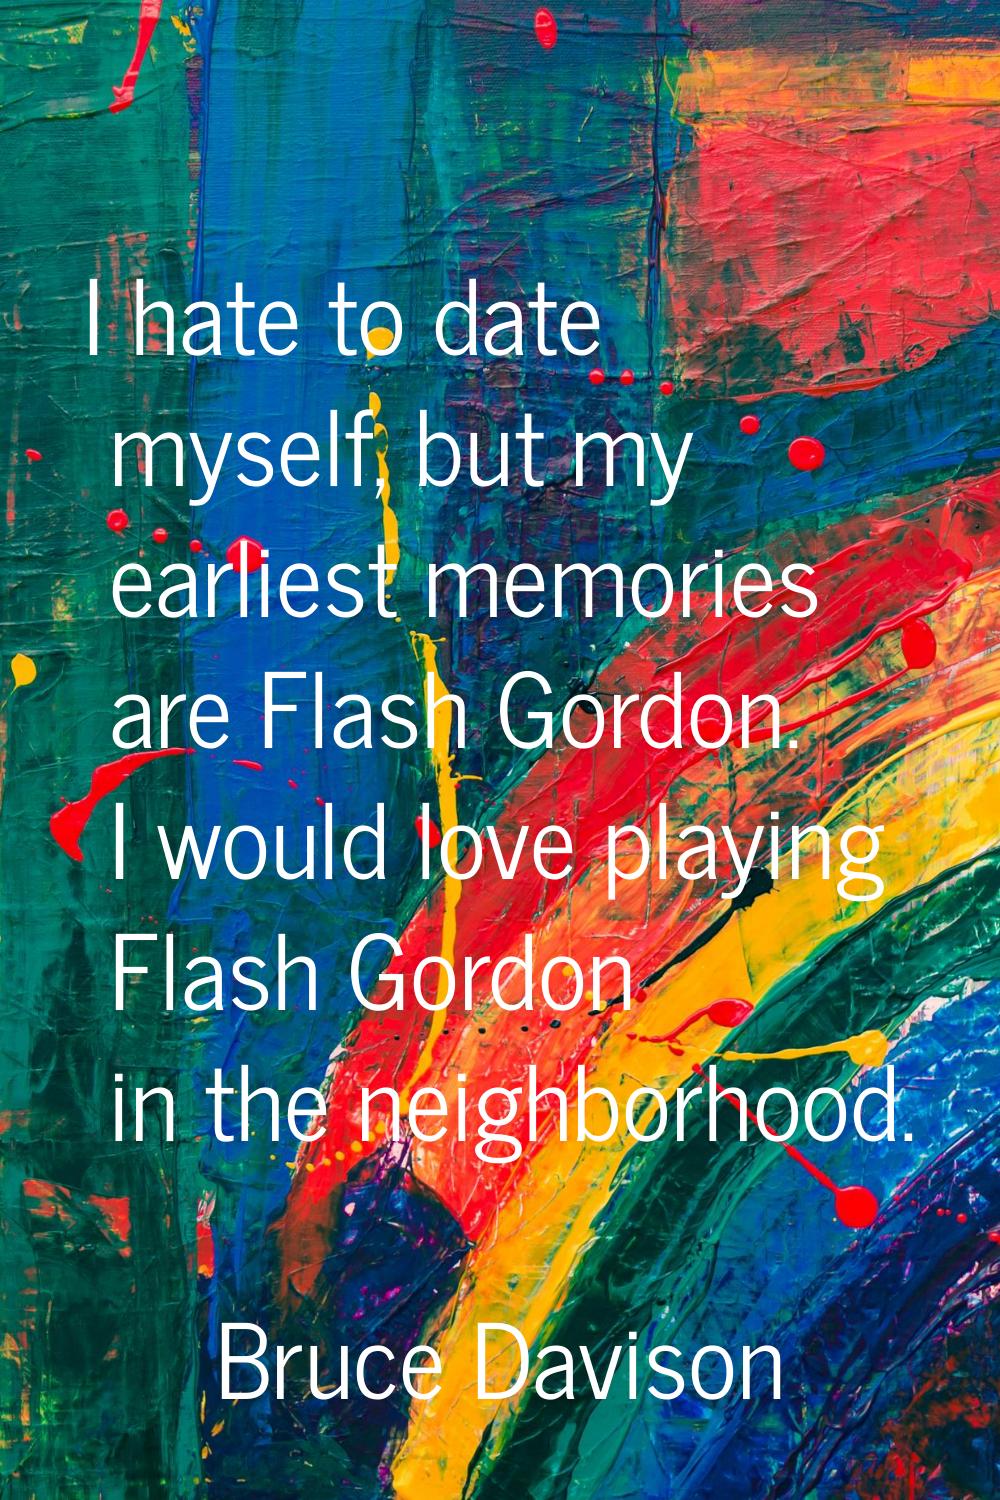 I hate to date myself, but my earliest memories are Flash Gordon. I would love playing Flash Gordon